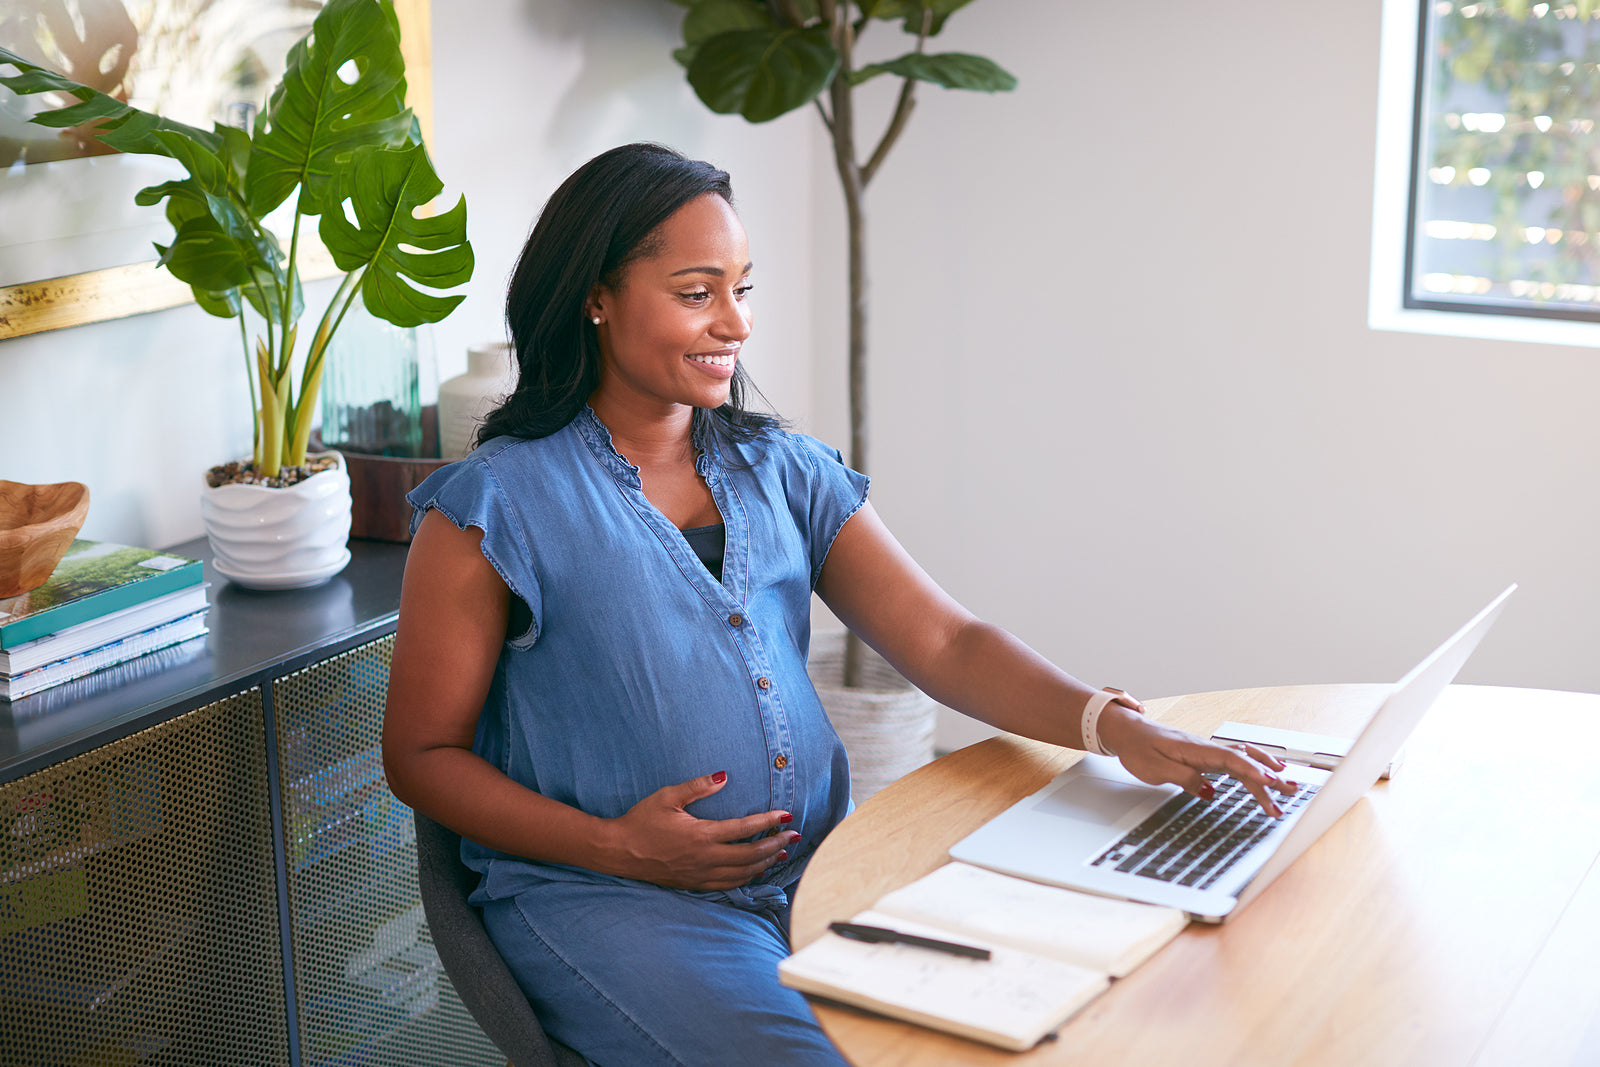 [US] Final rule implementing Pregnant Workers Fairness Act issued